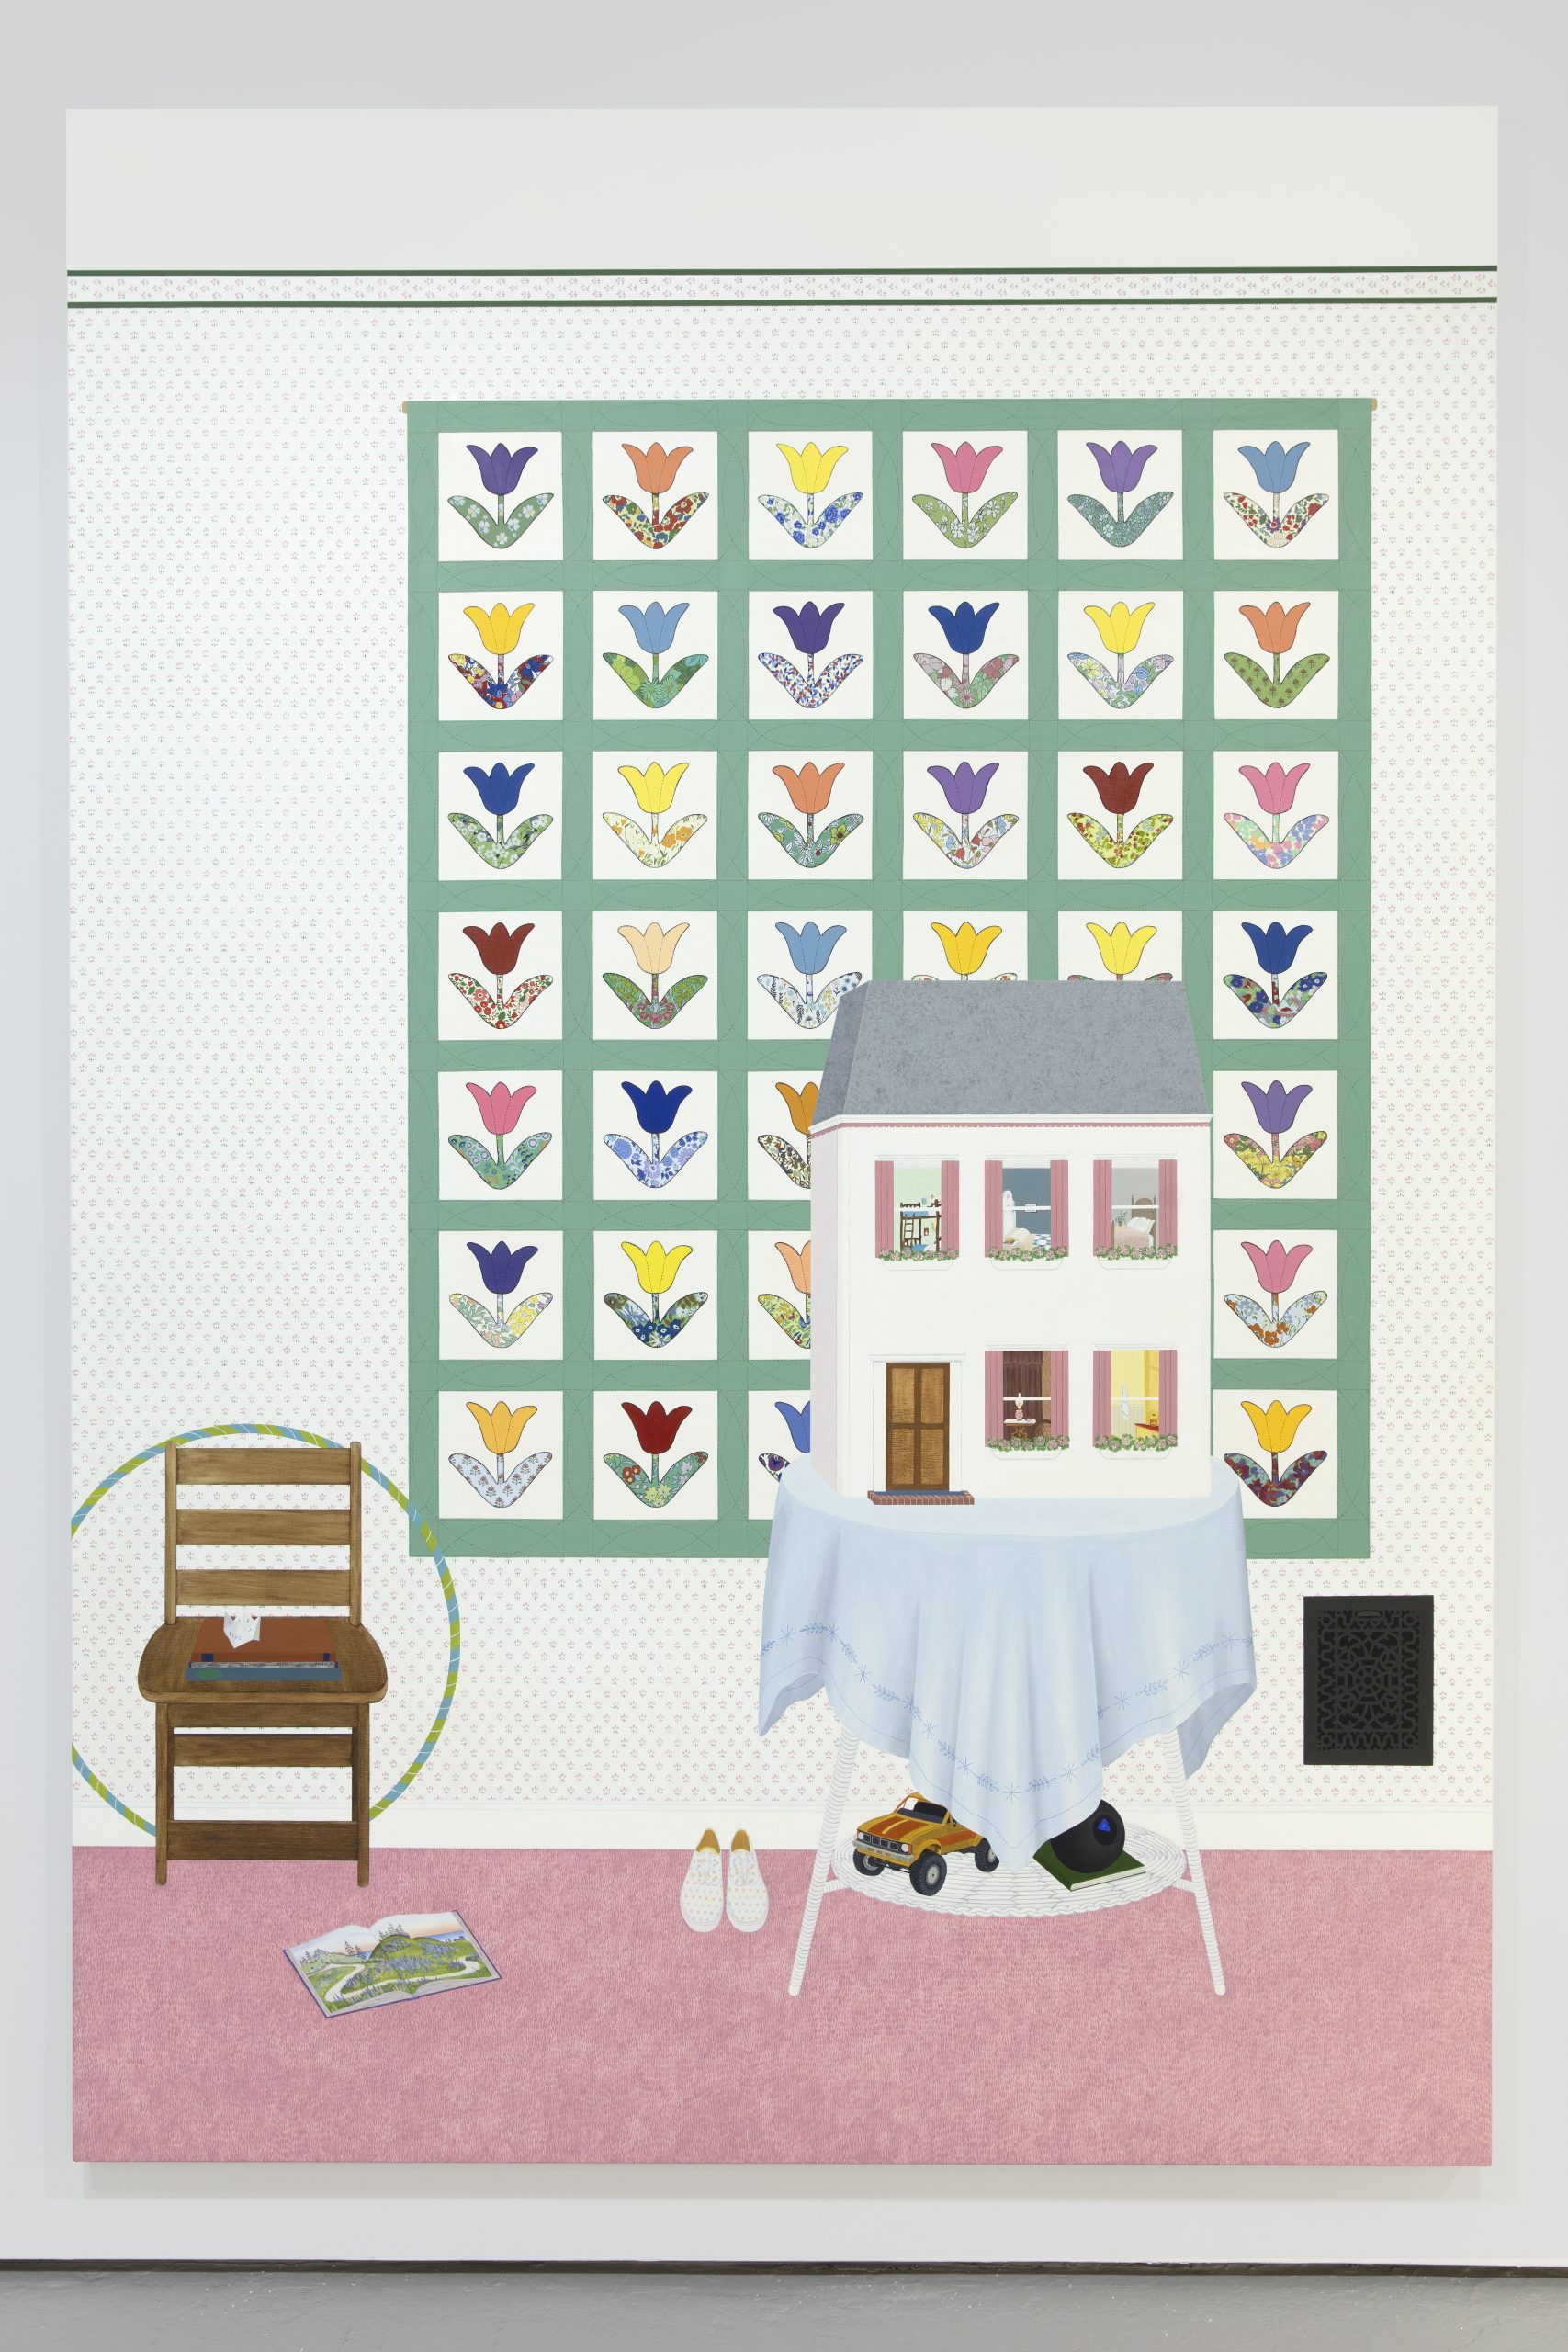 Painting of a dollhouse against a poster in a domestic interior